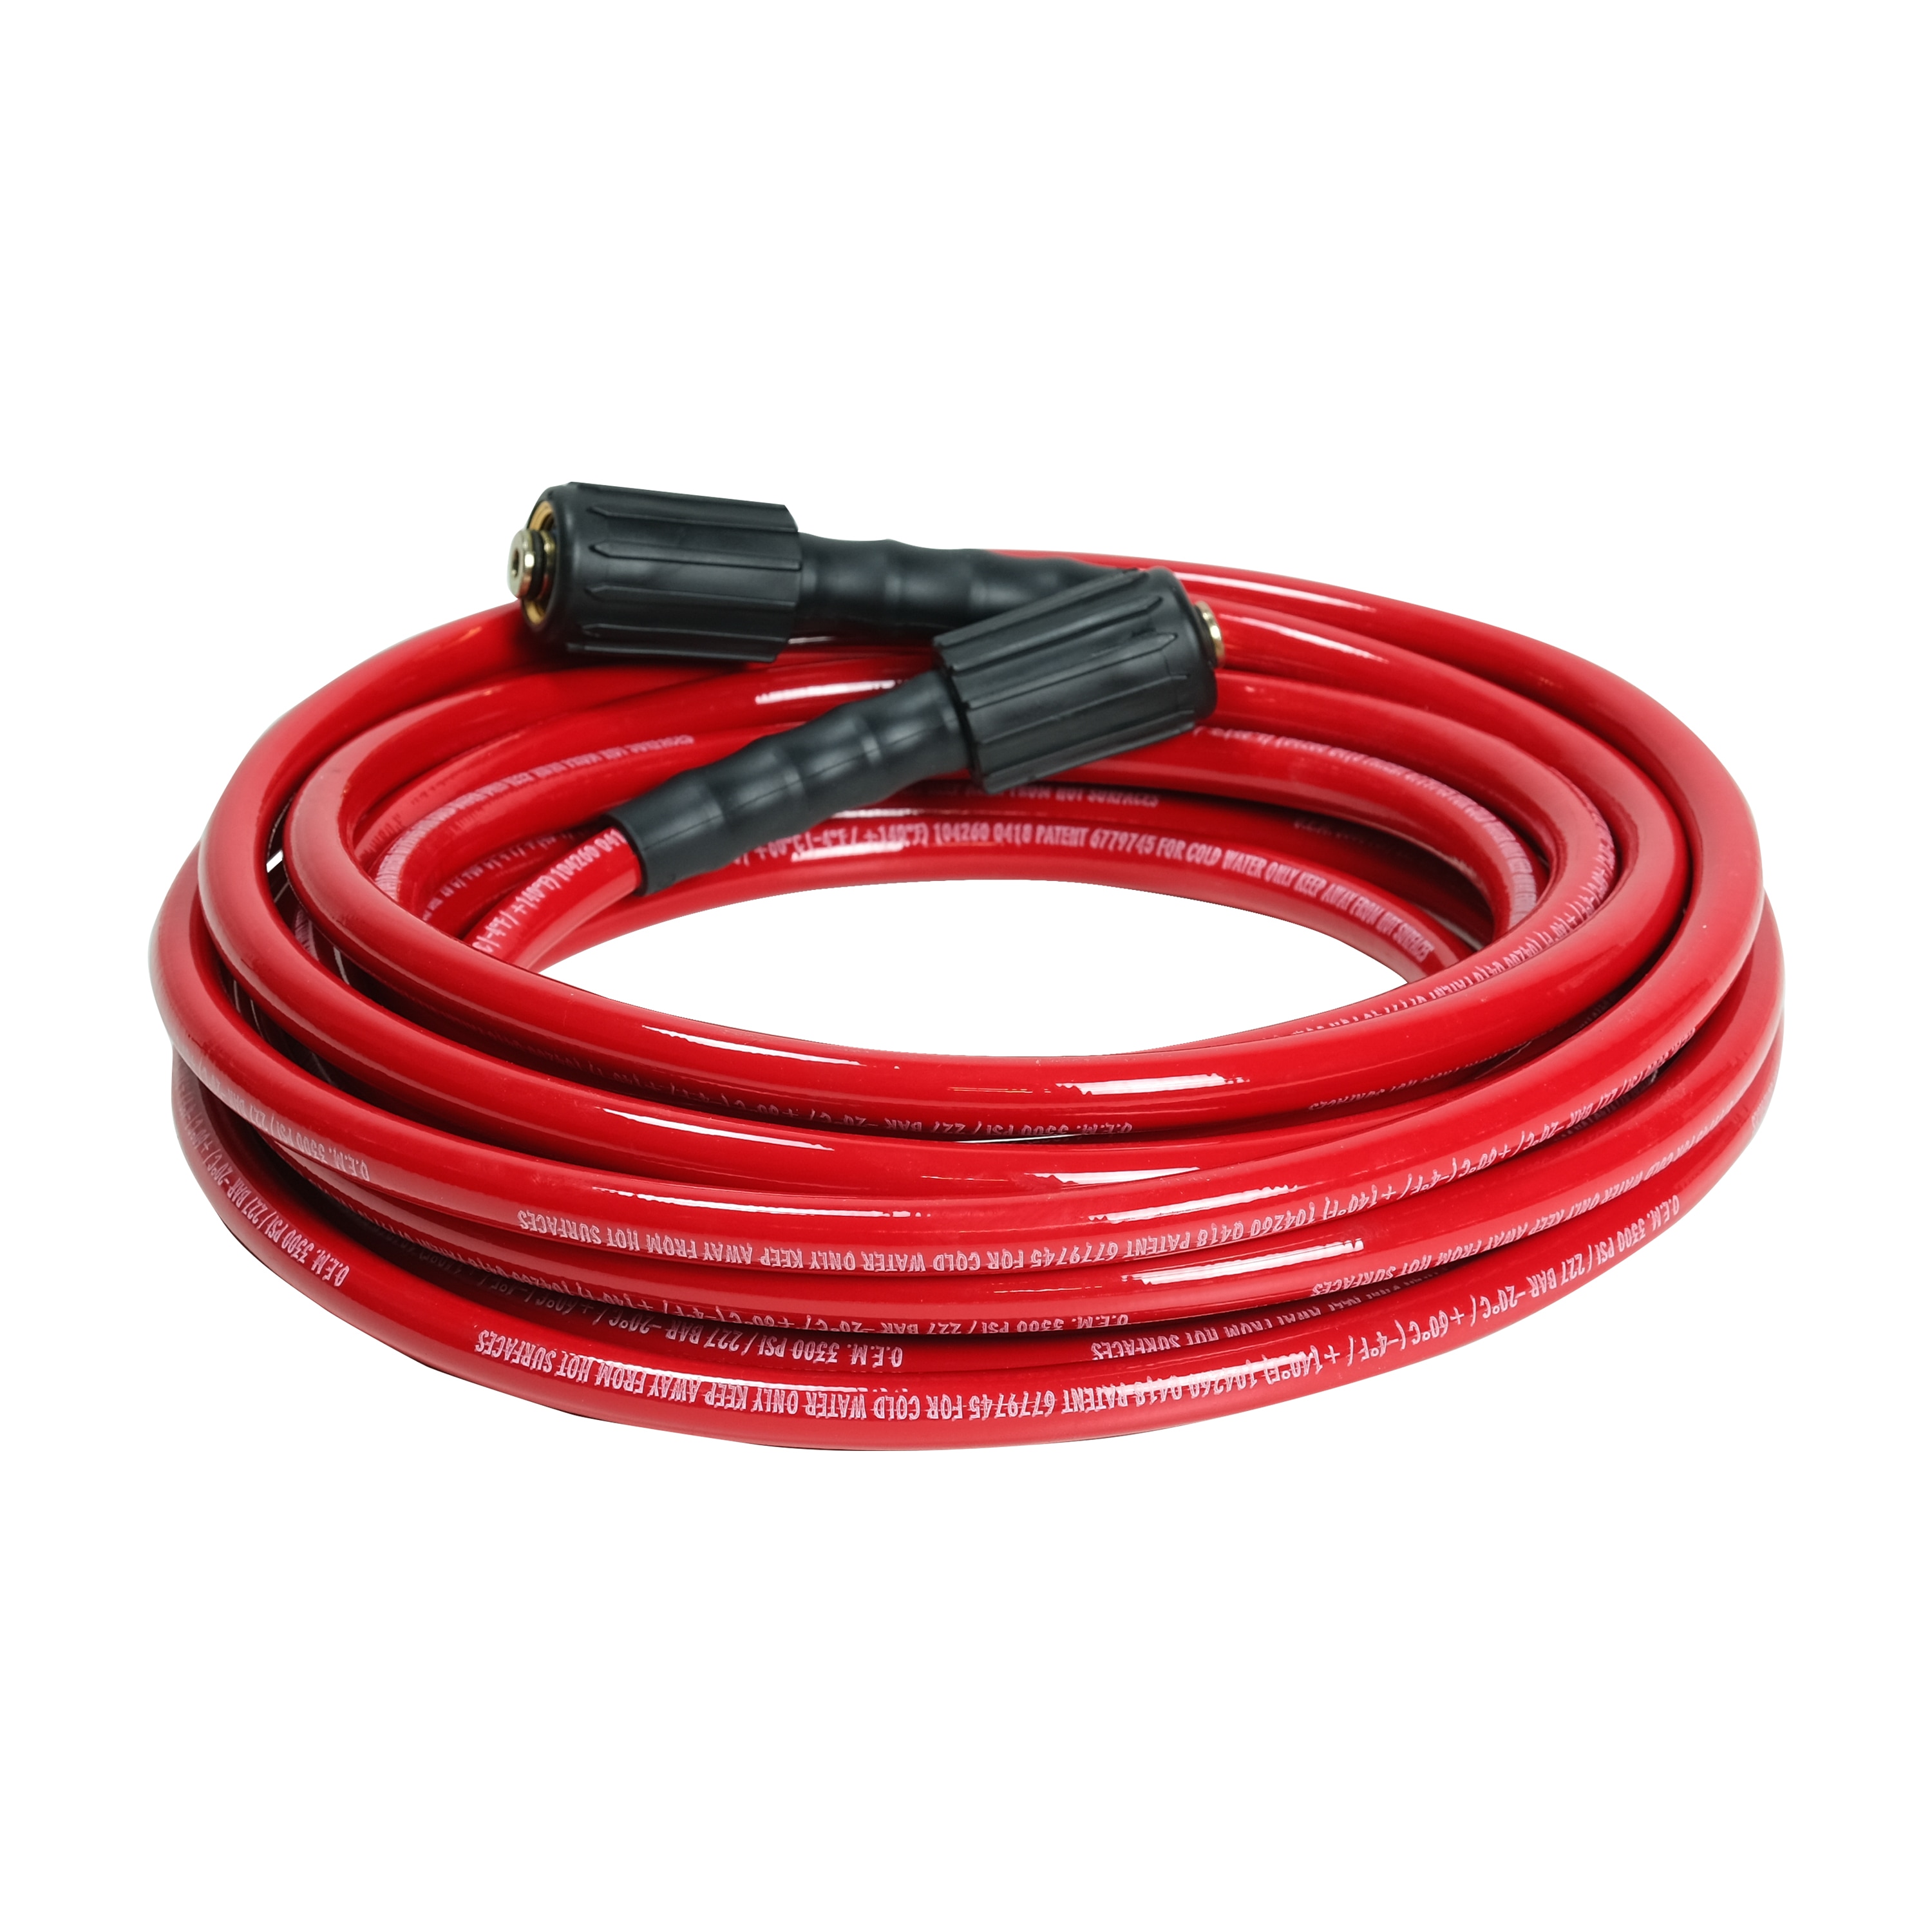 New 4 Metre RAC HP006 Type Pressure Power Washer Replacement Hose Four 4M M 